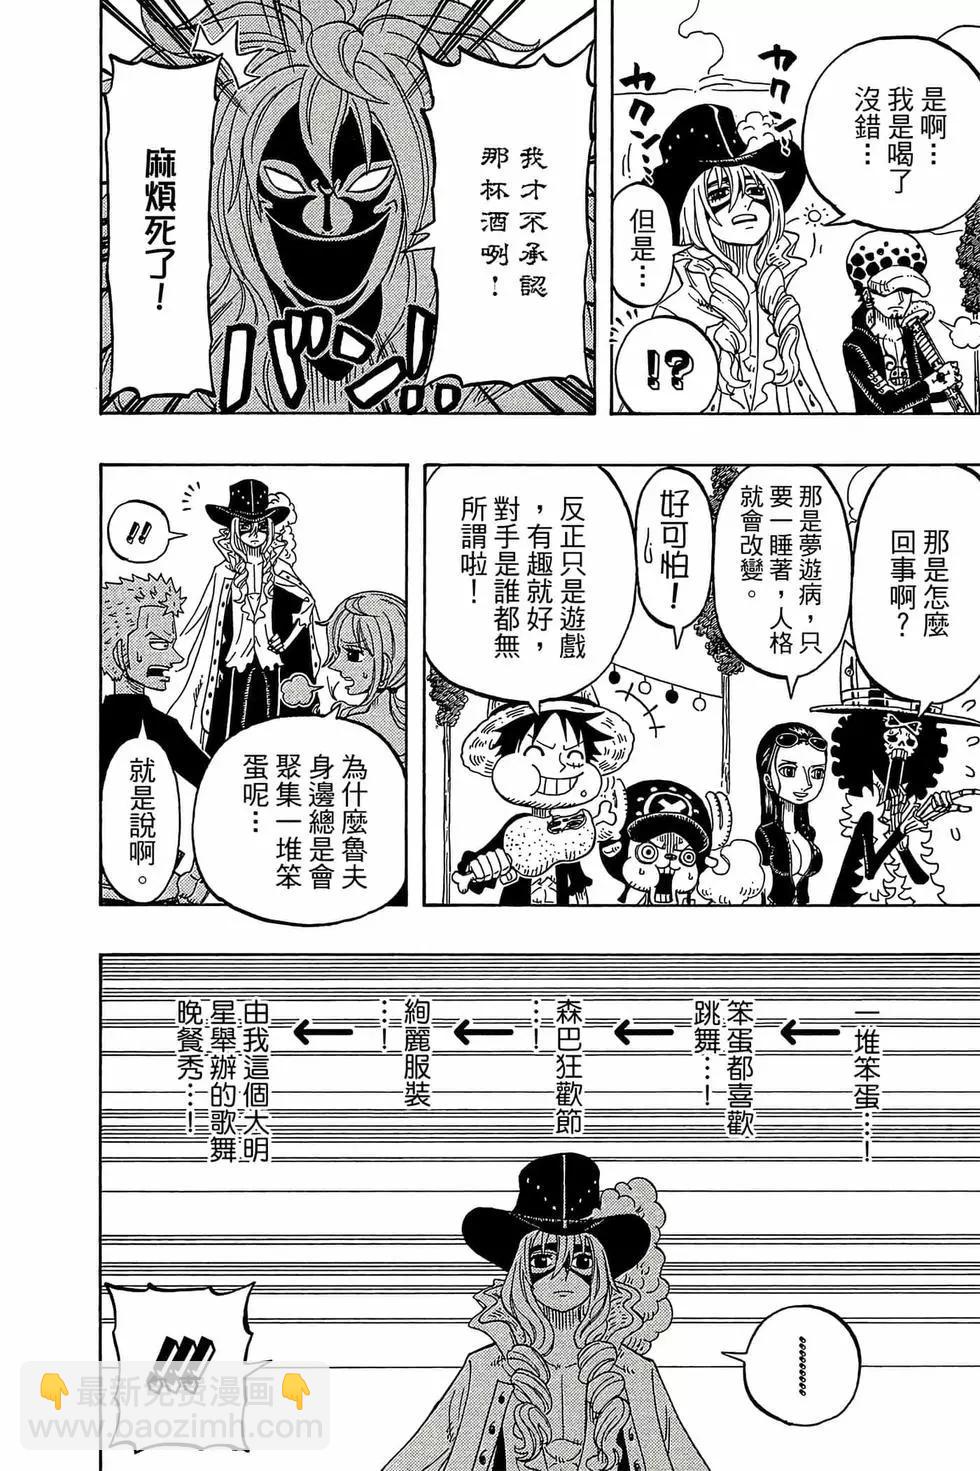 One piece party - 第02卷(1/4) - 5